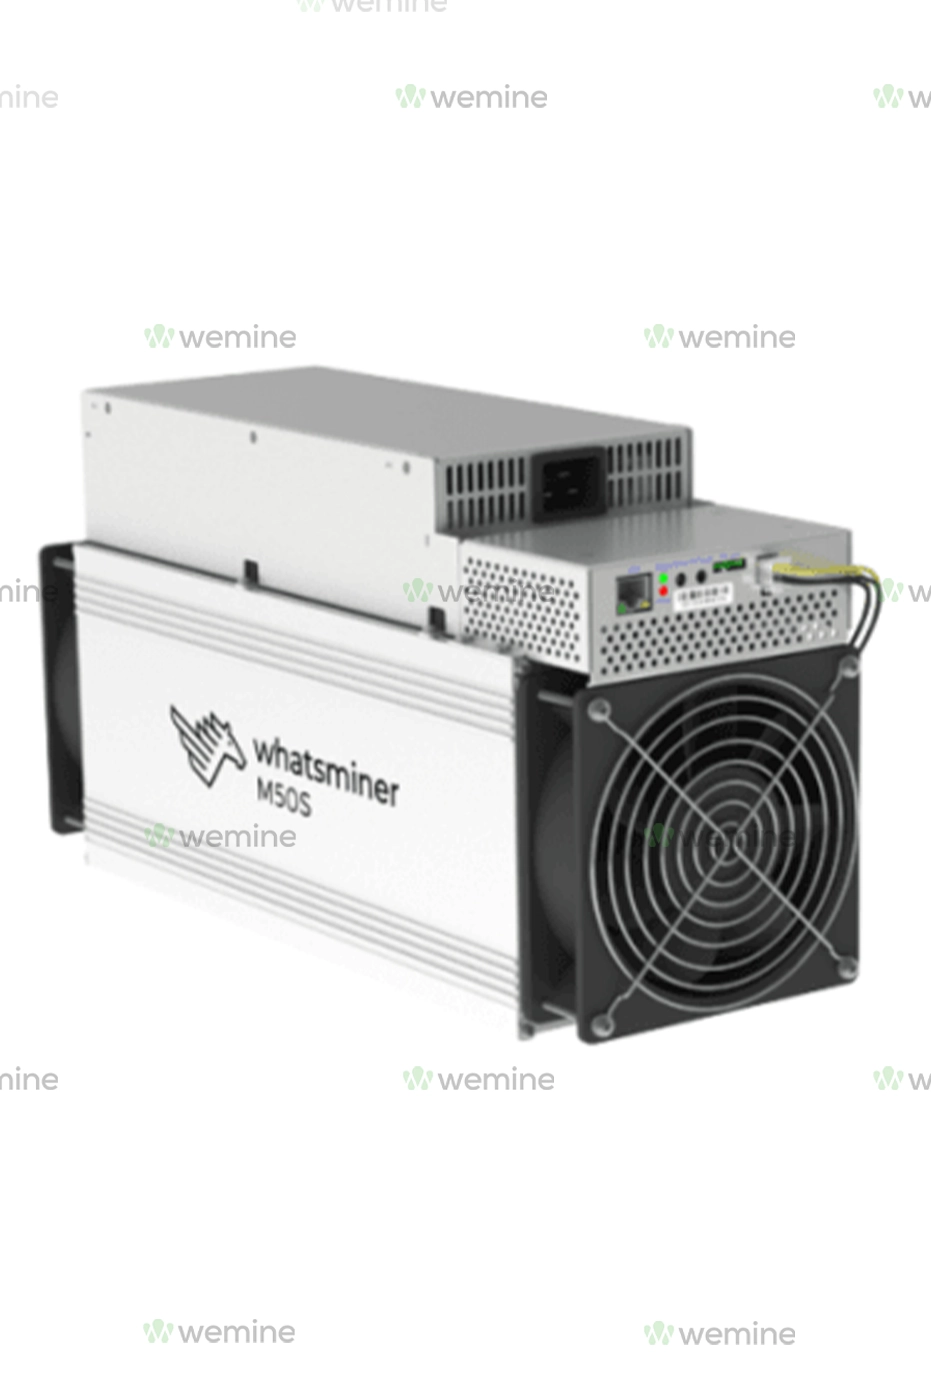 Cryptocurrency mining hardware consisting of a white unit with 'Whatsminer M50' branding and an attached power supply, featuring a prominent round black fan for cooling